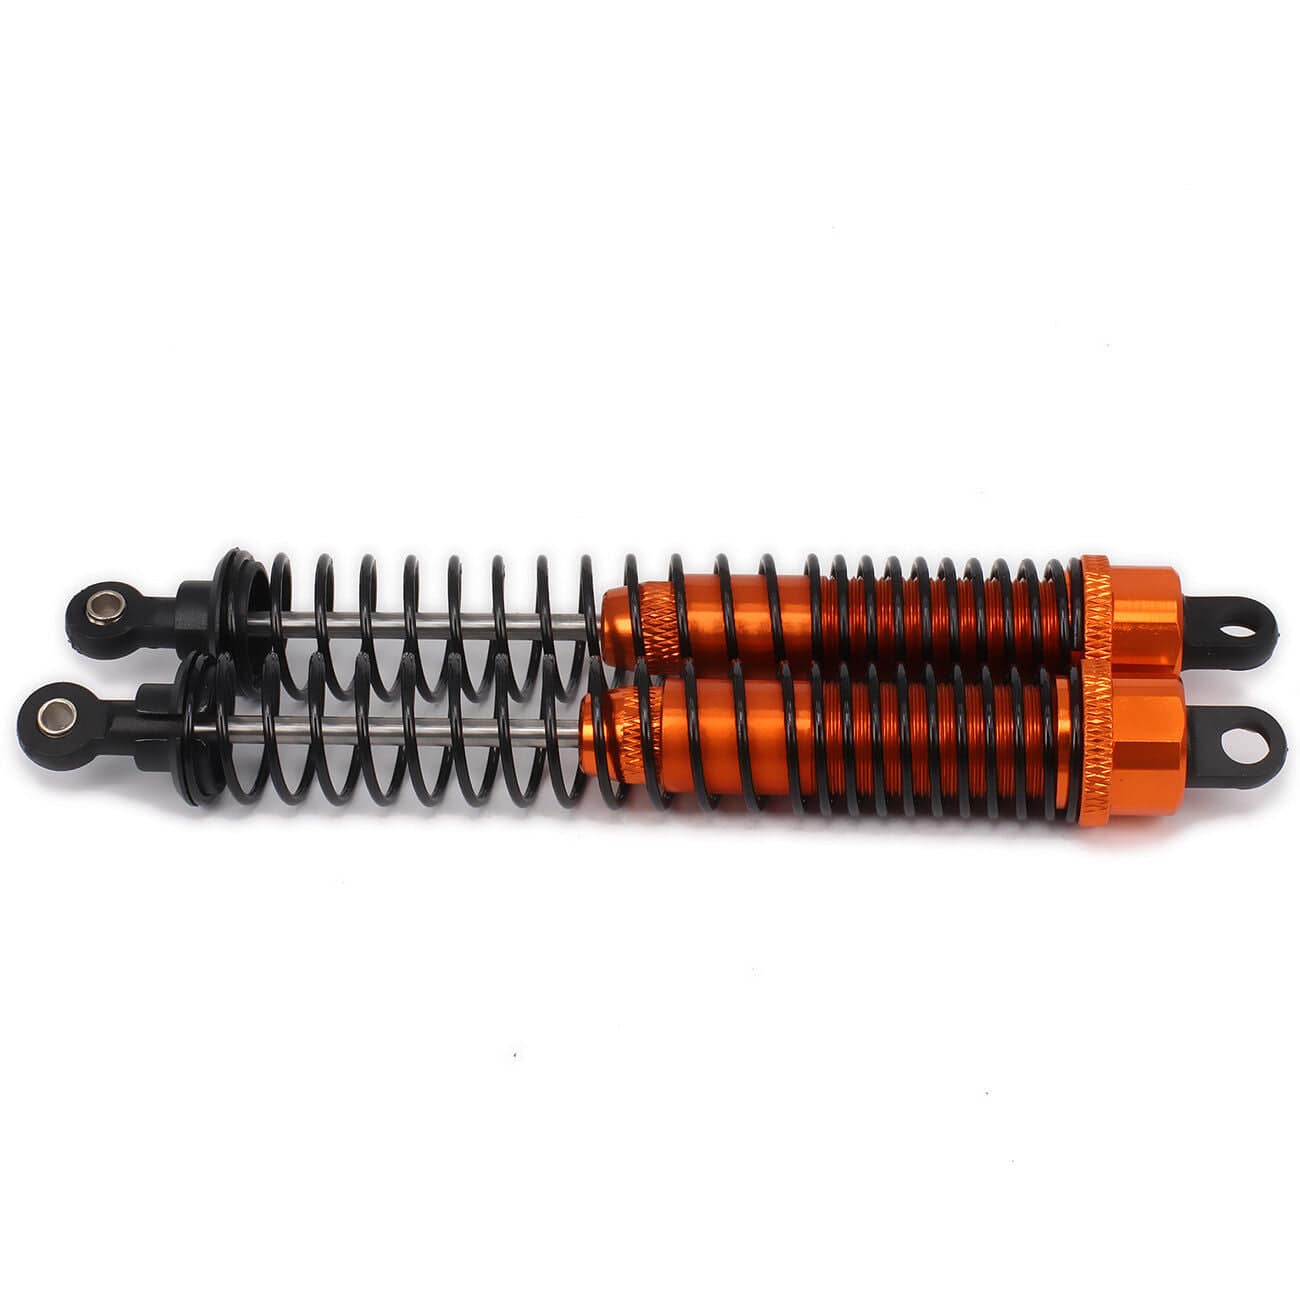 RCAWD RC CAR UPGRADE PARTS Orange RCAWD Adjustable 130mm RC Shock Absorber Damper For RC Car 1/10 Model Car 2PCS